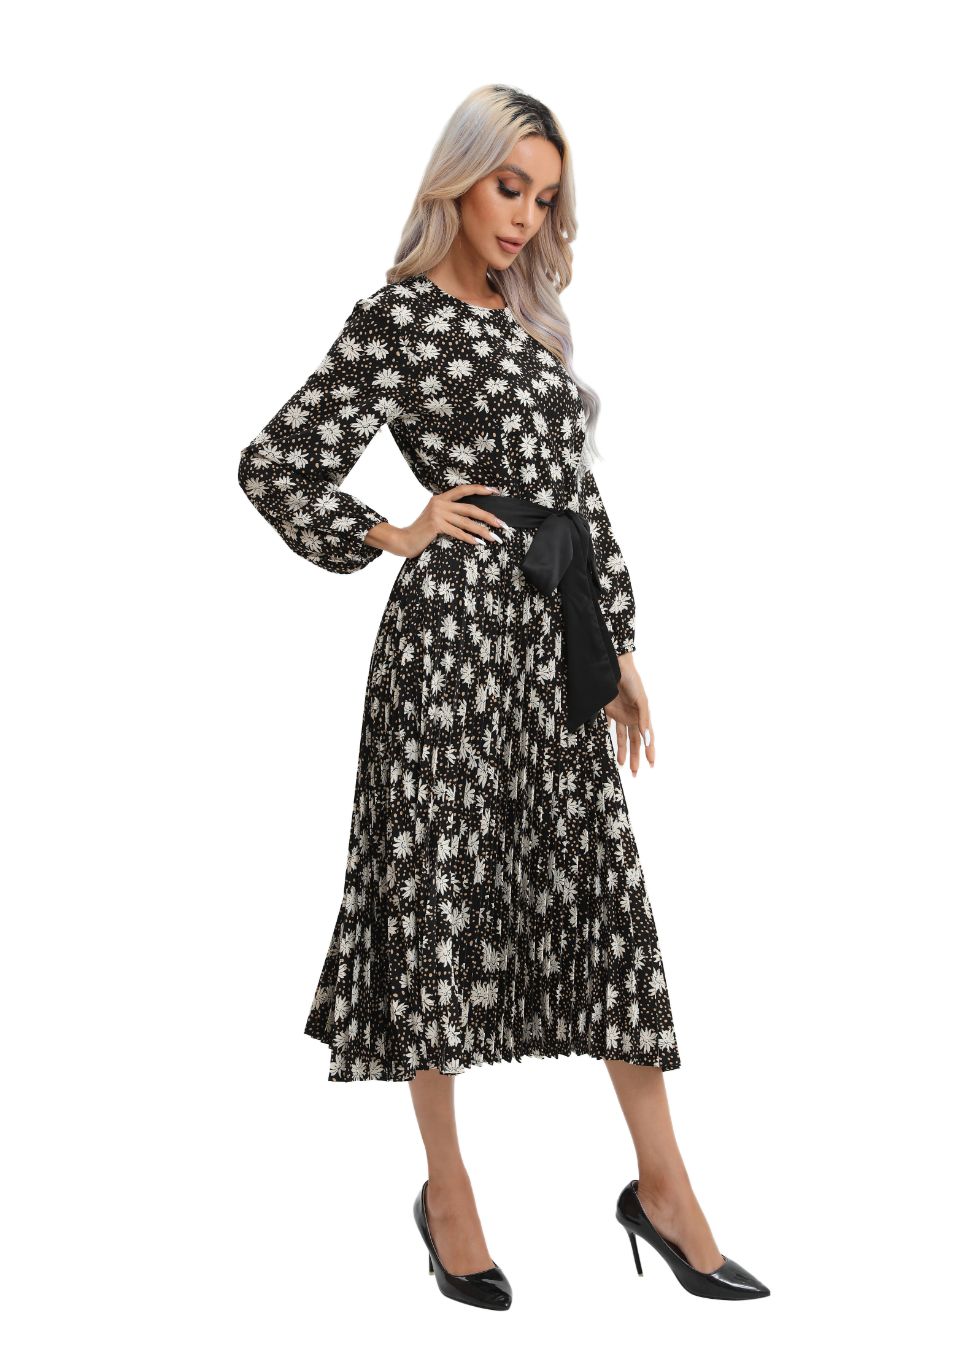 Modest Floral Midi Dress with Front Tie - alamaud